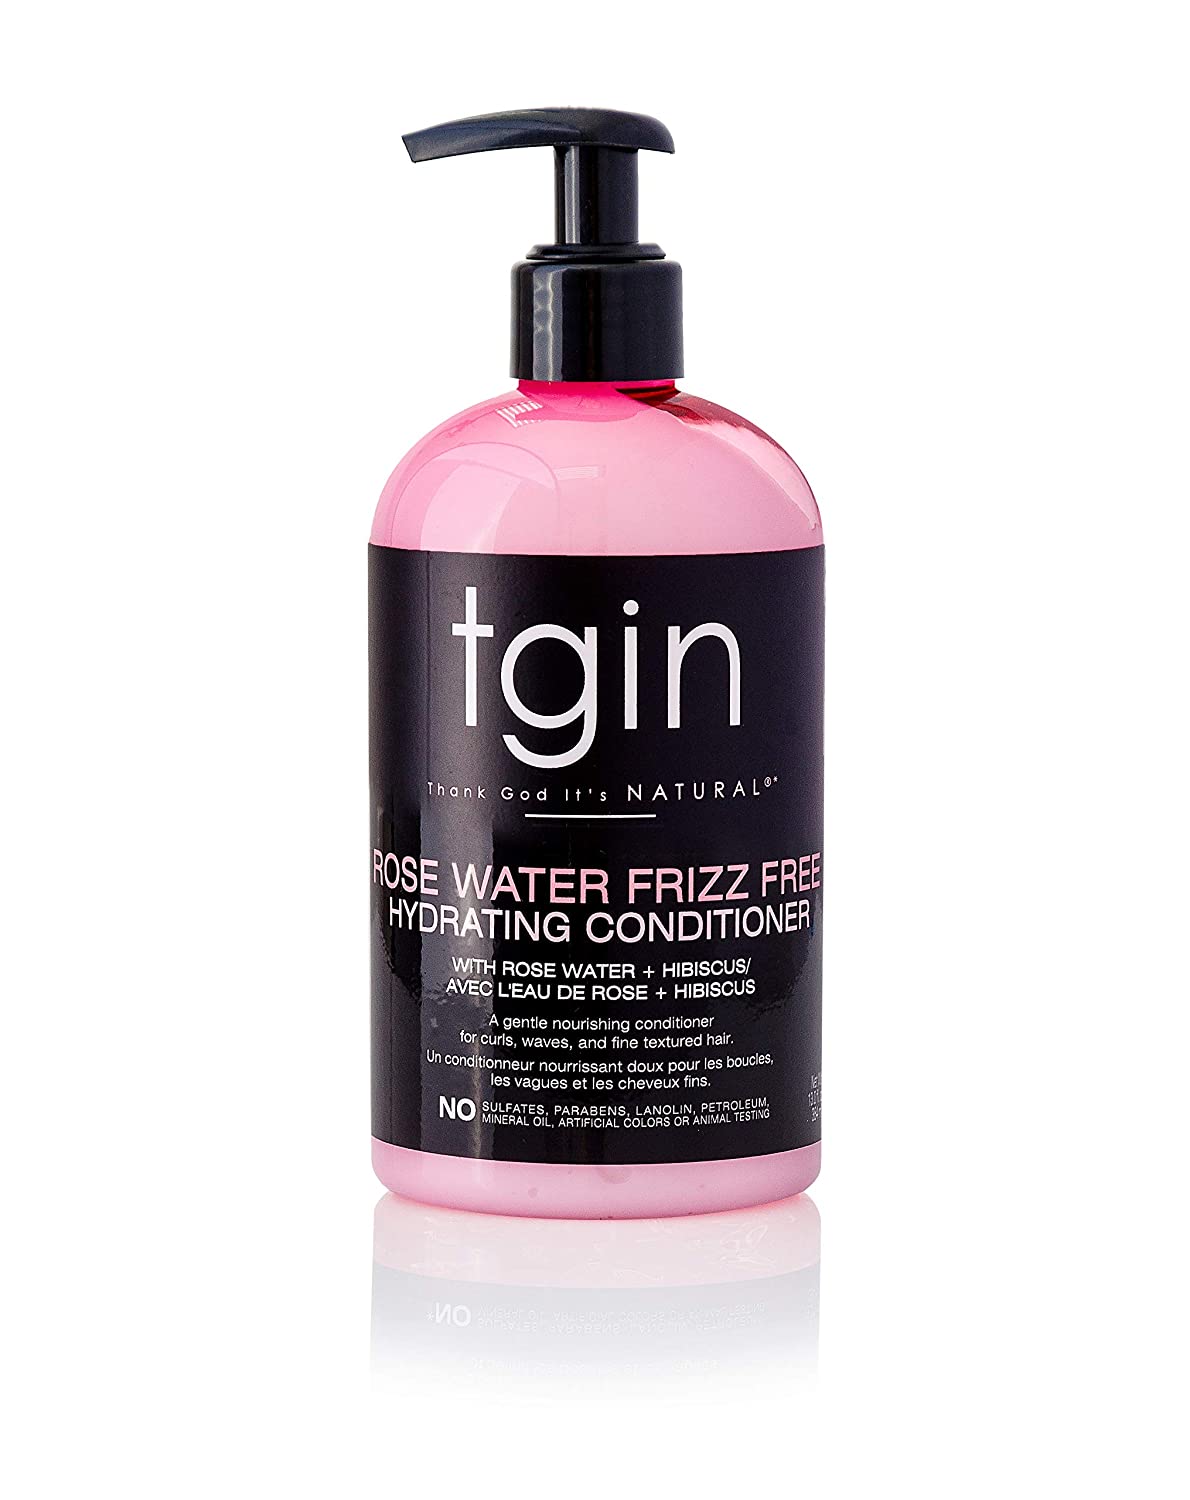 TGIN Rose Water Frizz Free Hydrating Conditioner 13oz